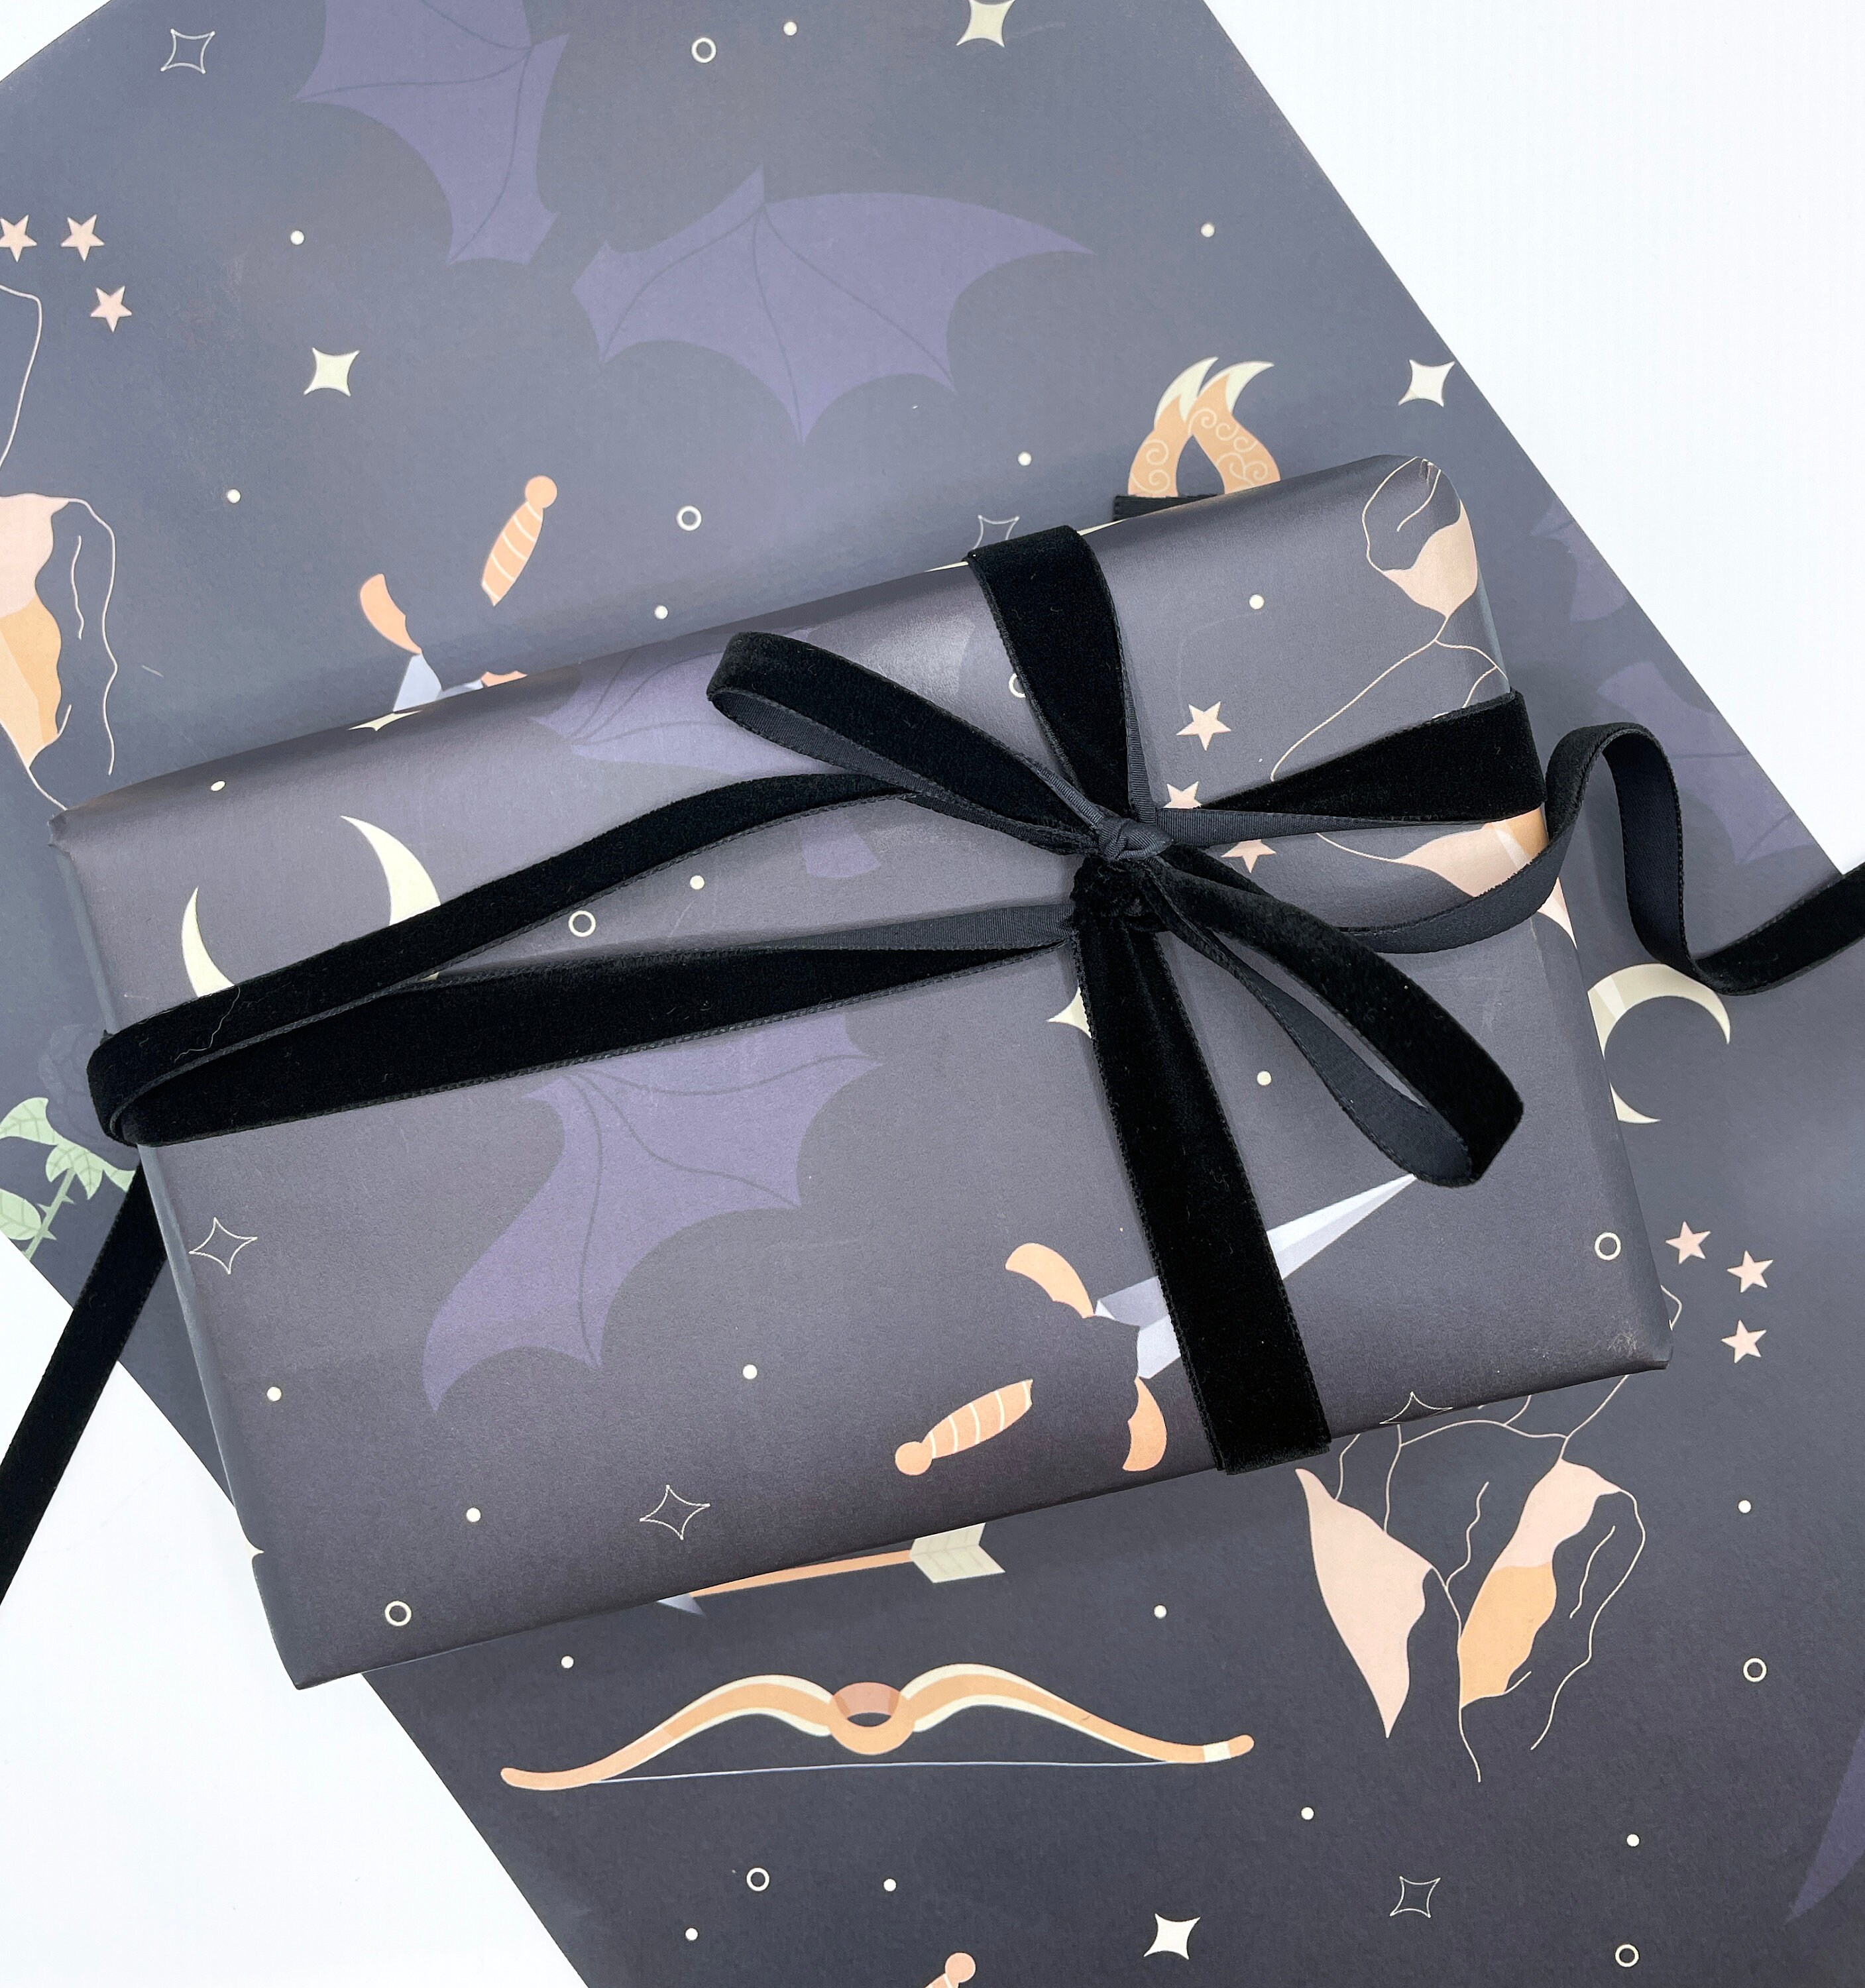 Book Themed Wrapping Paper for Literary Gift or Birthday Wrapping